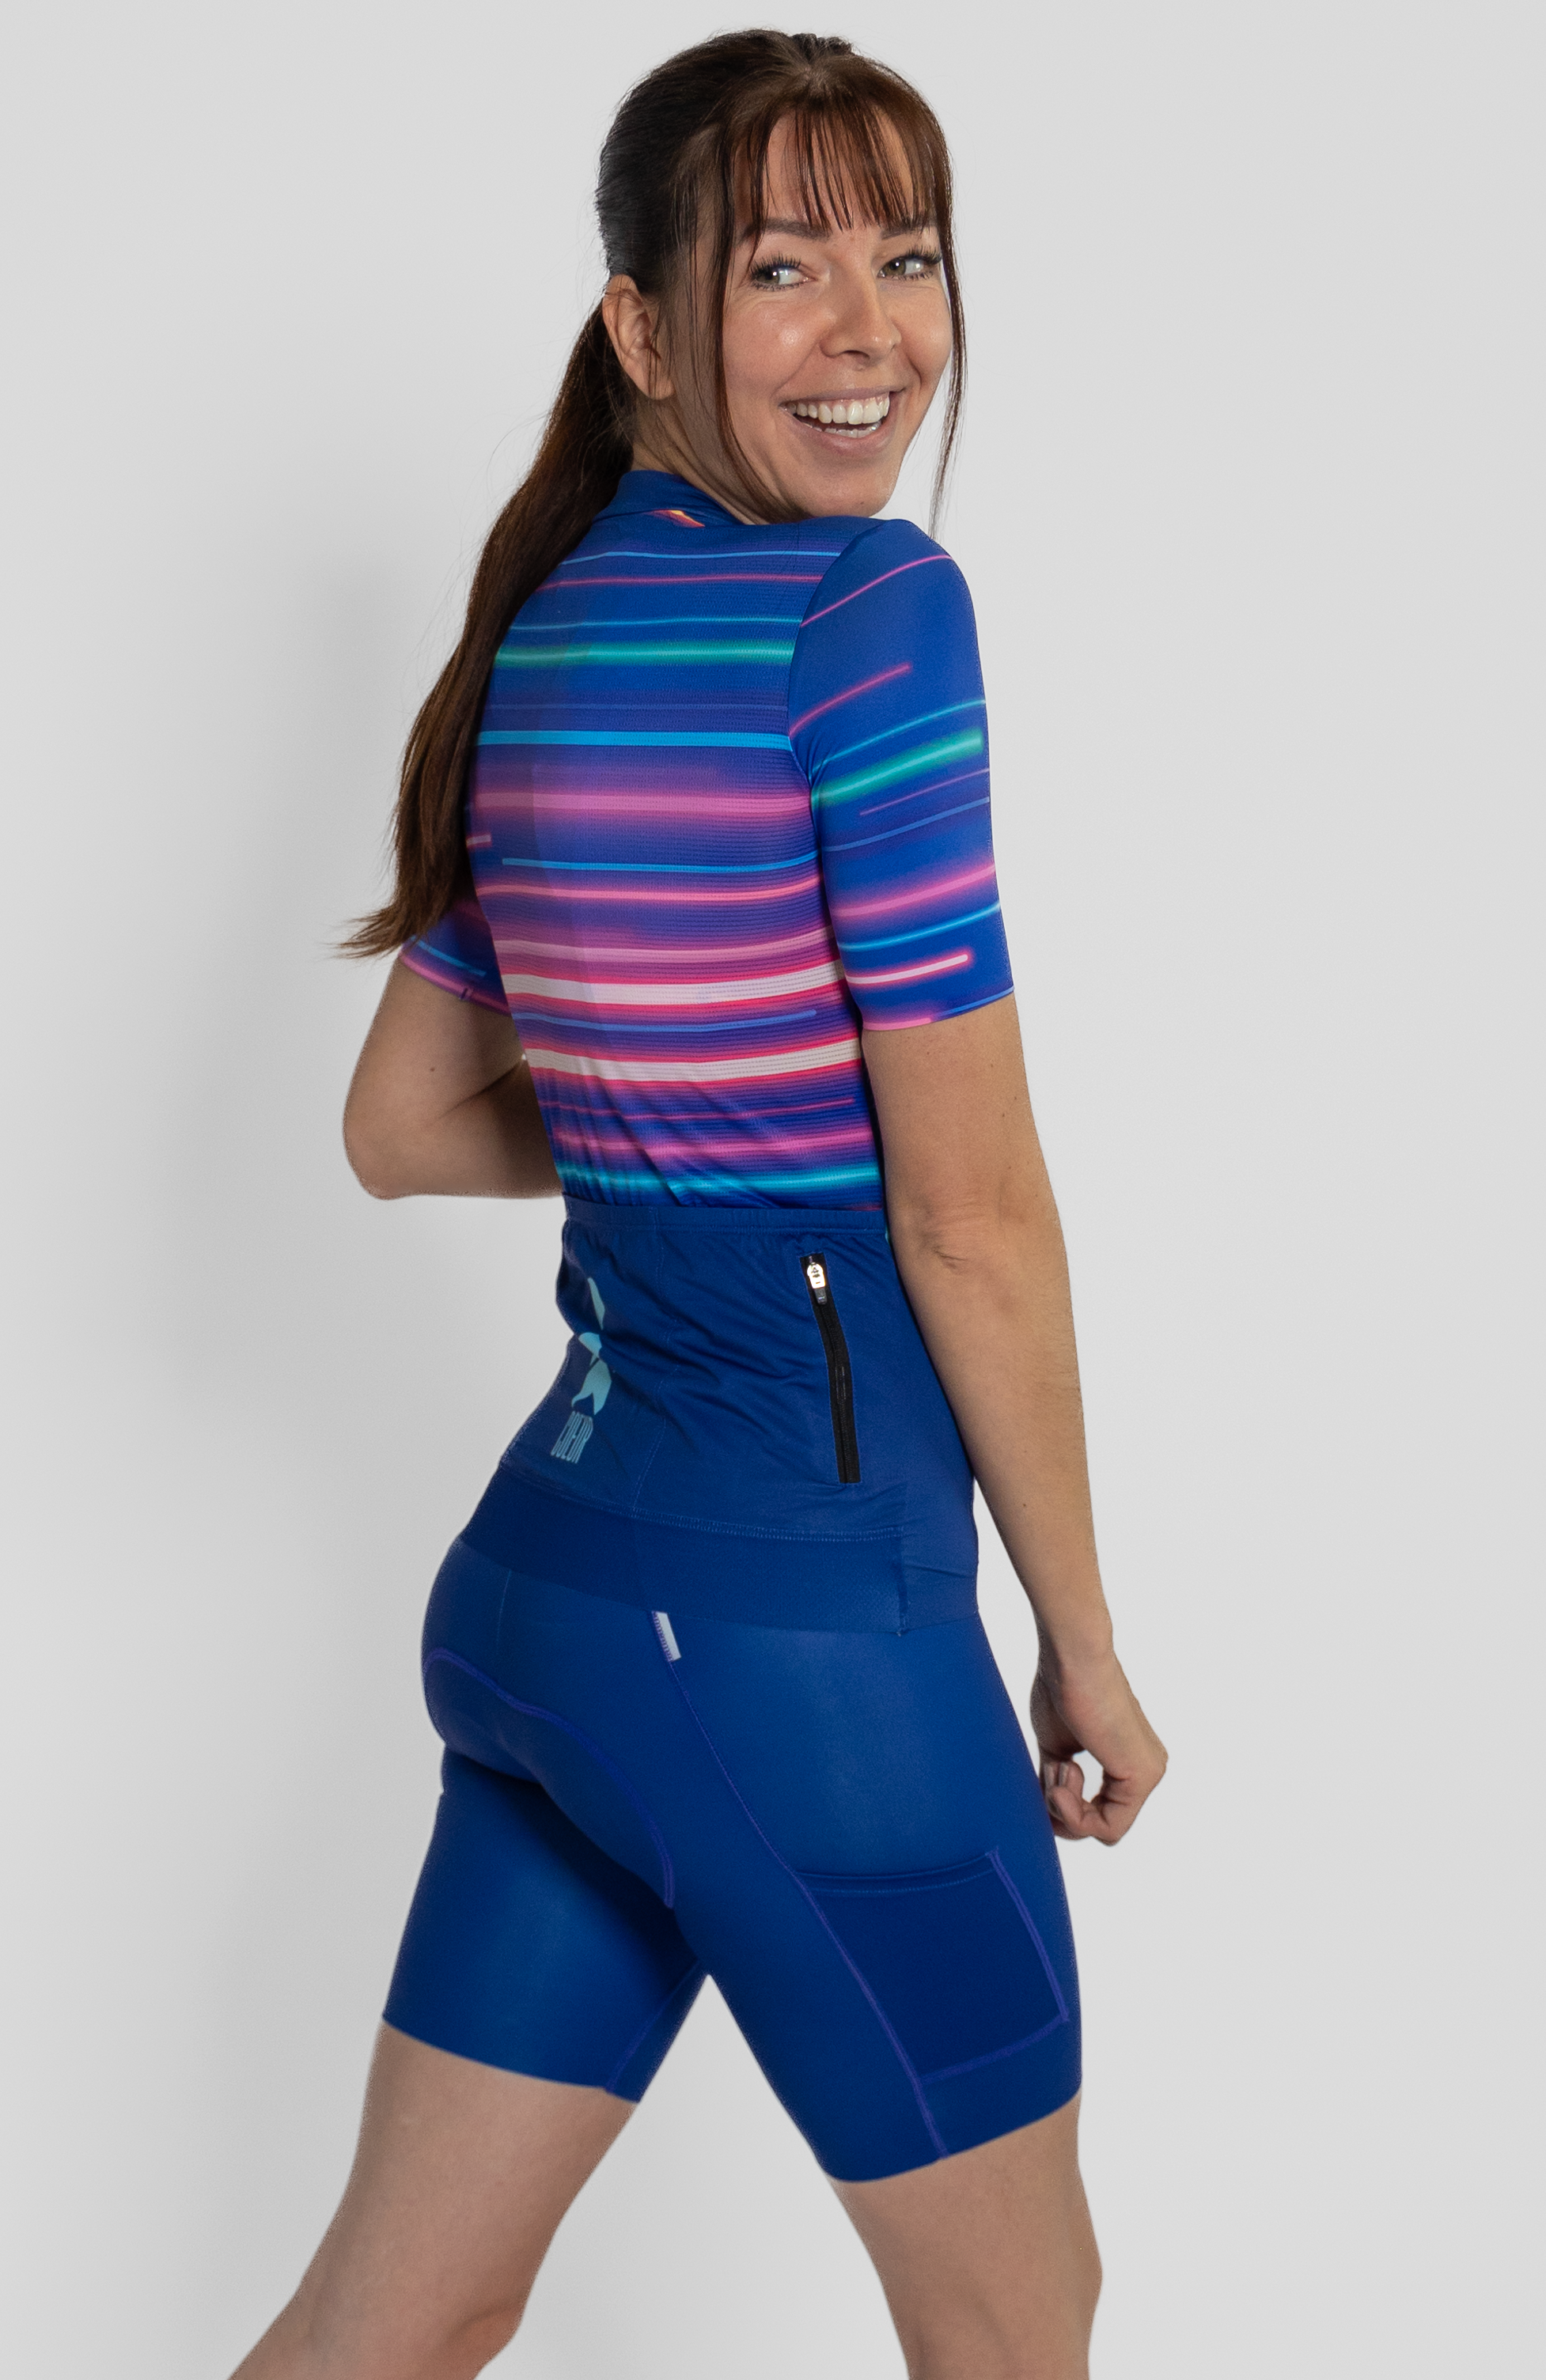 Coeur Sports Cycling Jersey PRESALE! Collective Beat 24 Women's Cycling Jersey